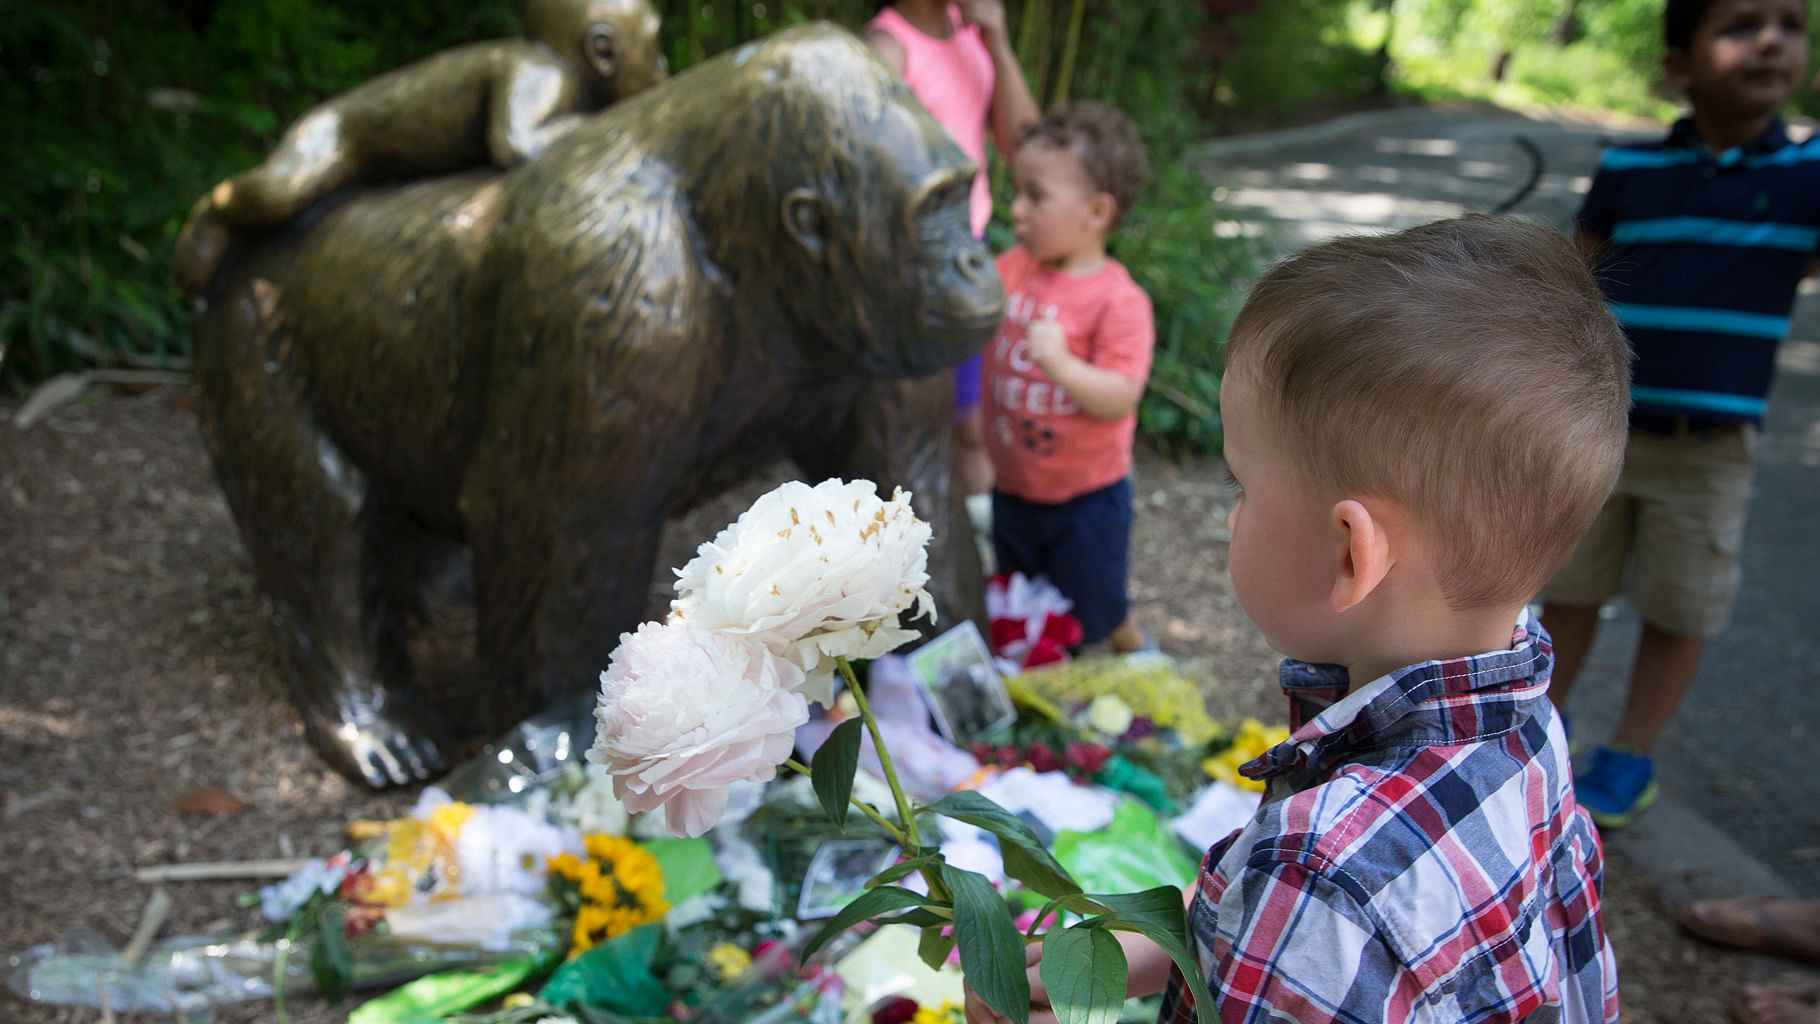 

A boy brings flowers to put beside a statue of a gorilla outside the shuttered Gorilla World exhibit at the Cincinnati Zoo &amp; Botanical Garden, Monday, 30  May  2016, in Cincinnati. (Photo: AP)